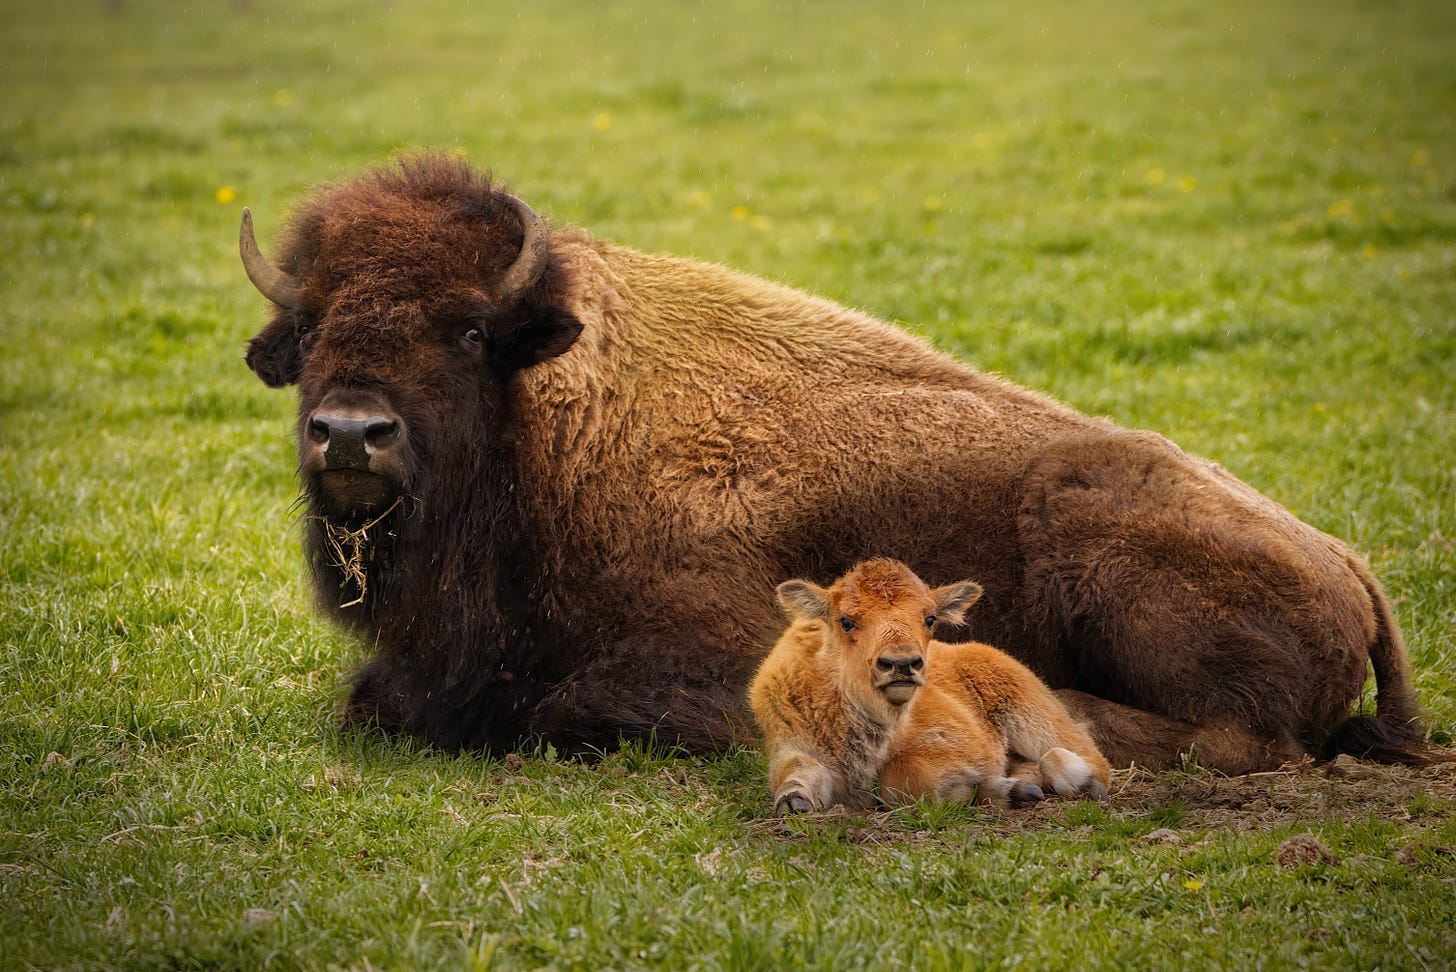 A bison cow resting with its calf